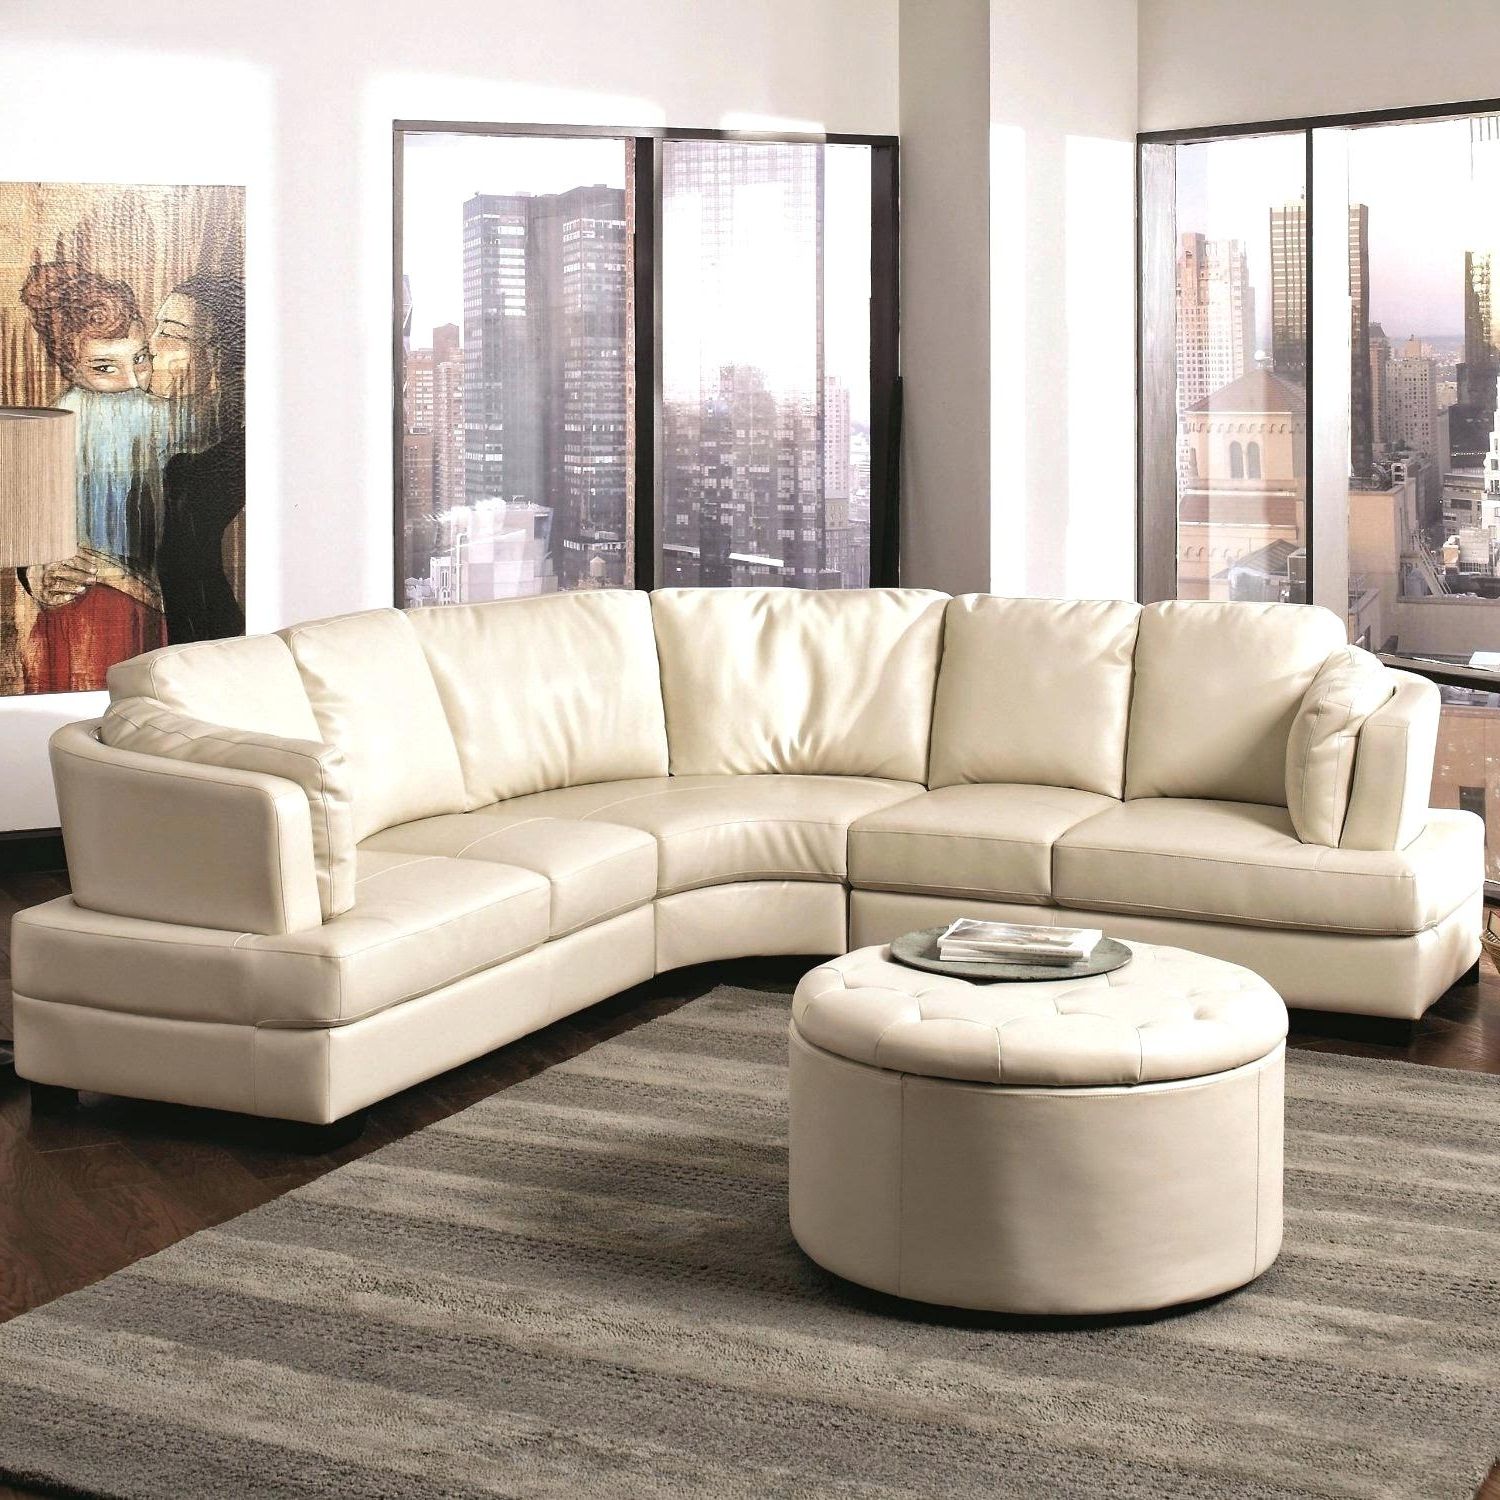 Sectional Sofa Sale Sa Couches For Near Me Liquidation Toronto For Preferred London Ontario Sectional Sofas (View 1 of 20)